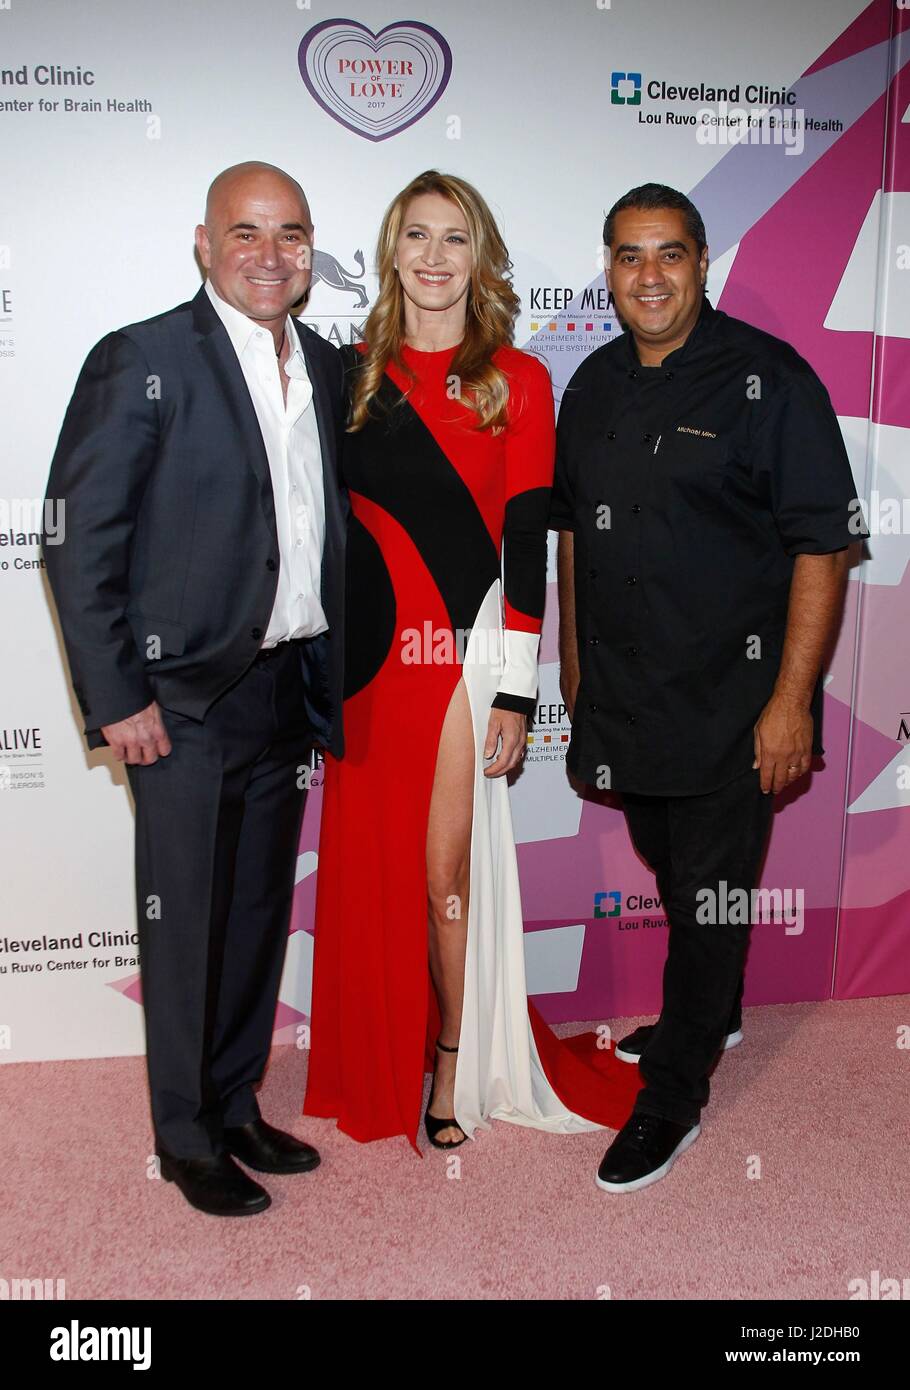 Las Vegas, NV, USA. 27th Apr, 2017. Andre Agassi, Steffi Graf, Chef Michael  Mina at arrivals for Keep Memory Alive 21st Annual Power Of Love Gala, MGM  Grand Garden Arena, Las Vegas,